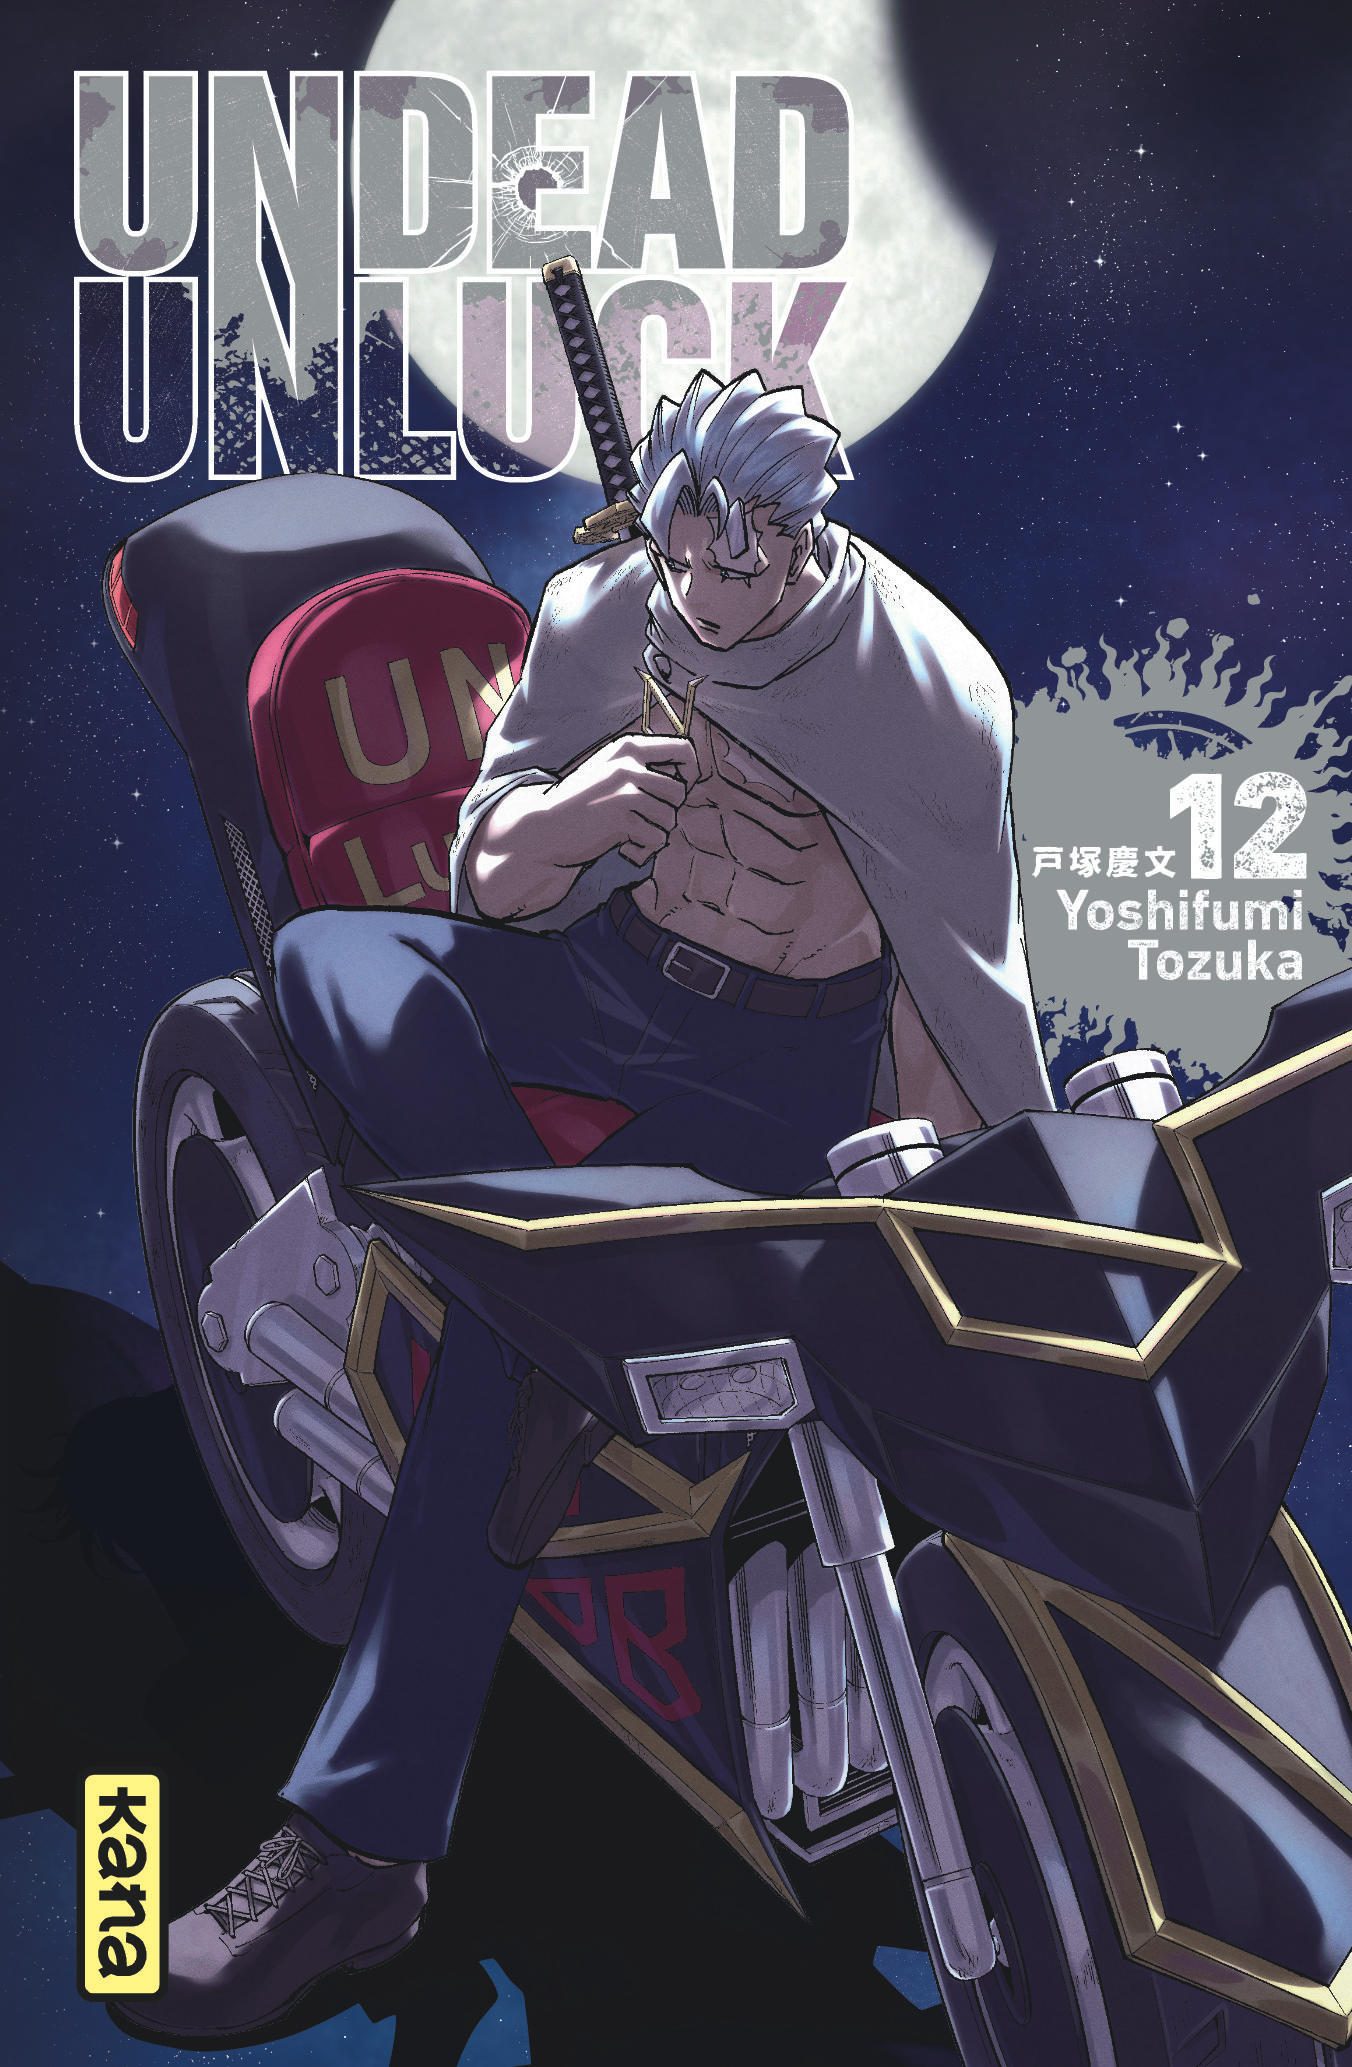 Undead unluck – Tome 12 - couv